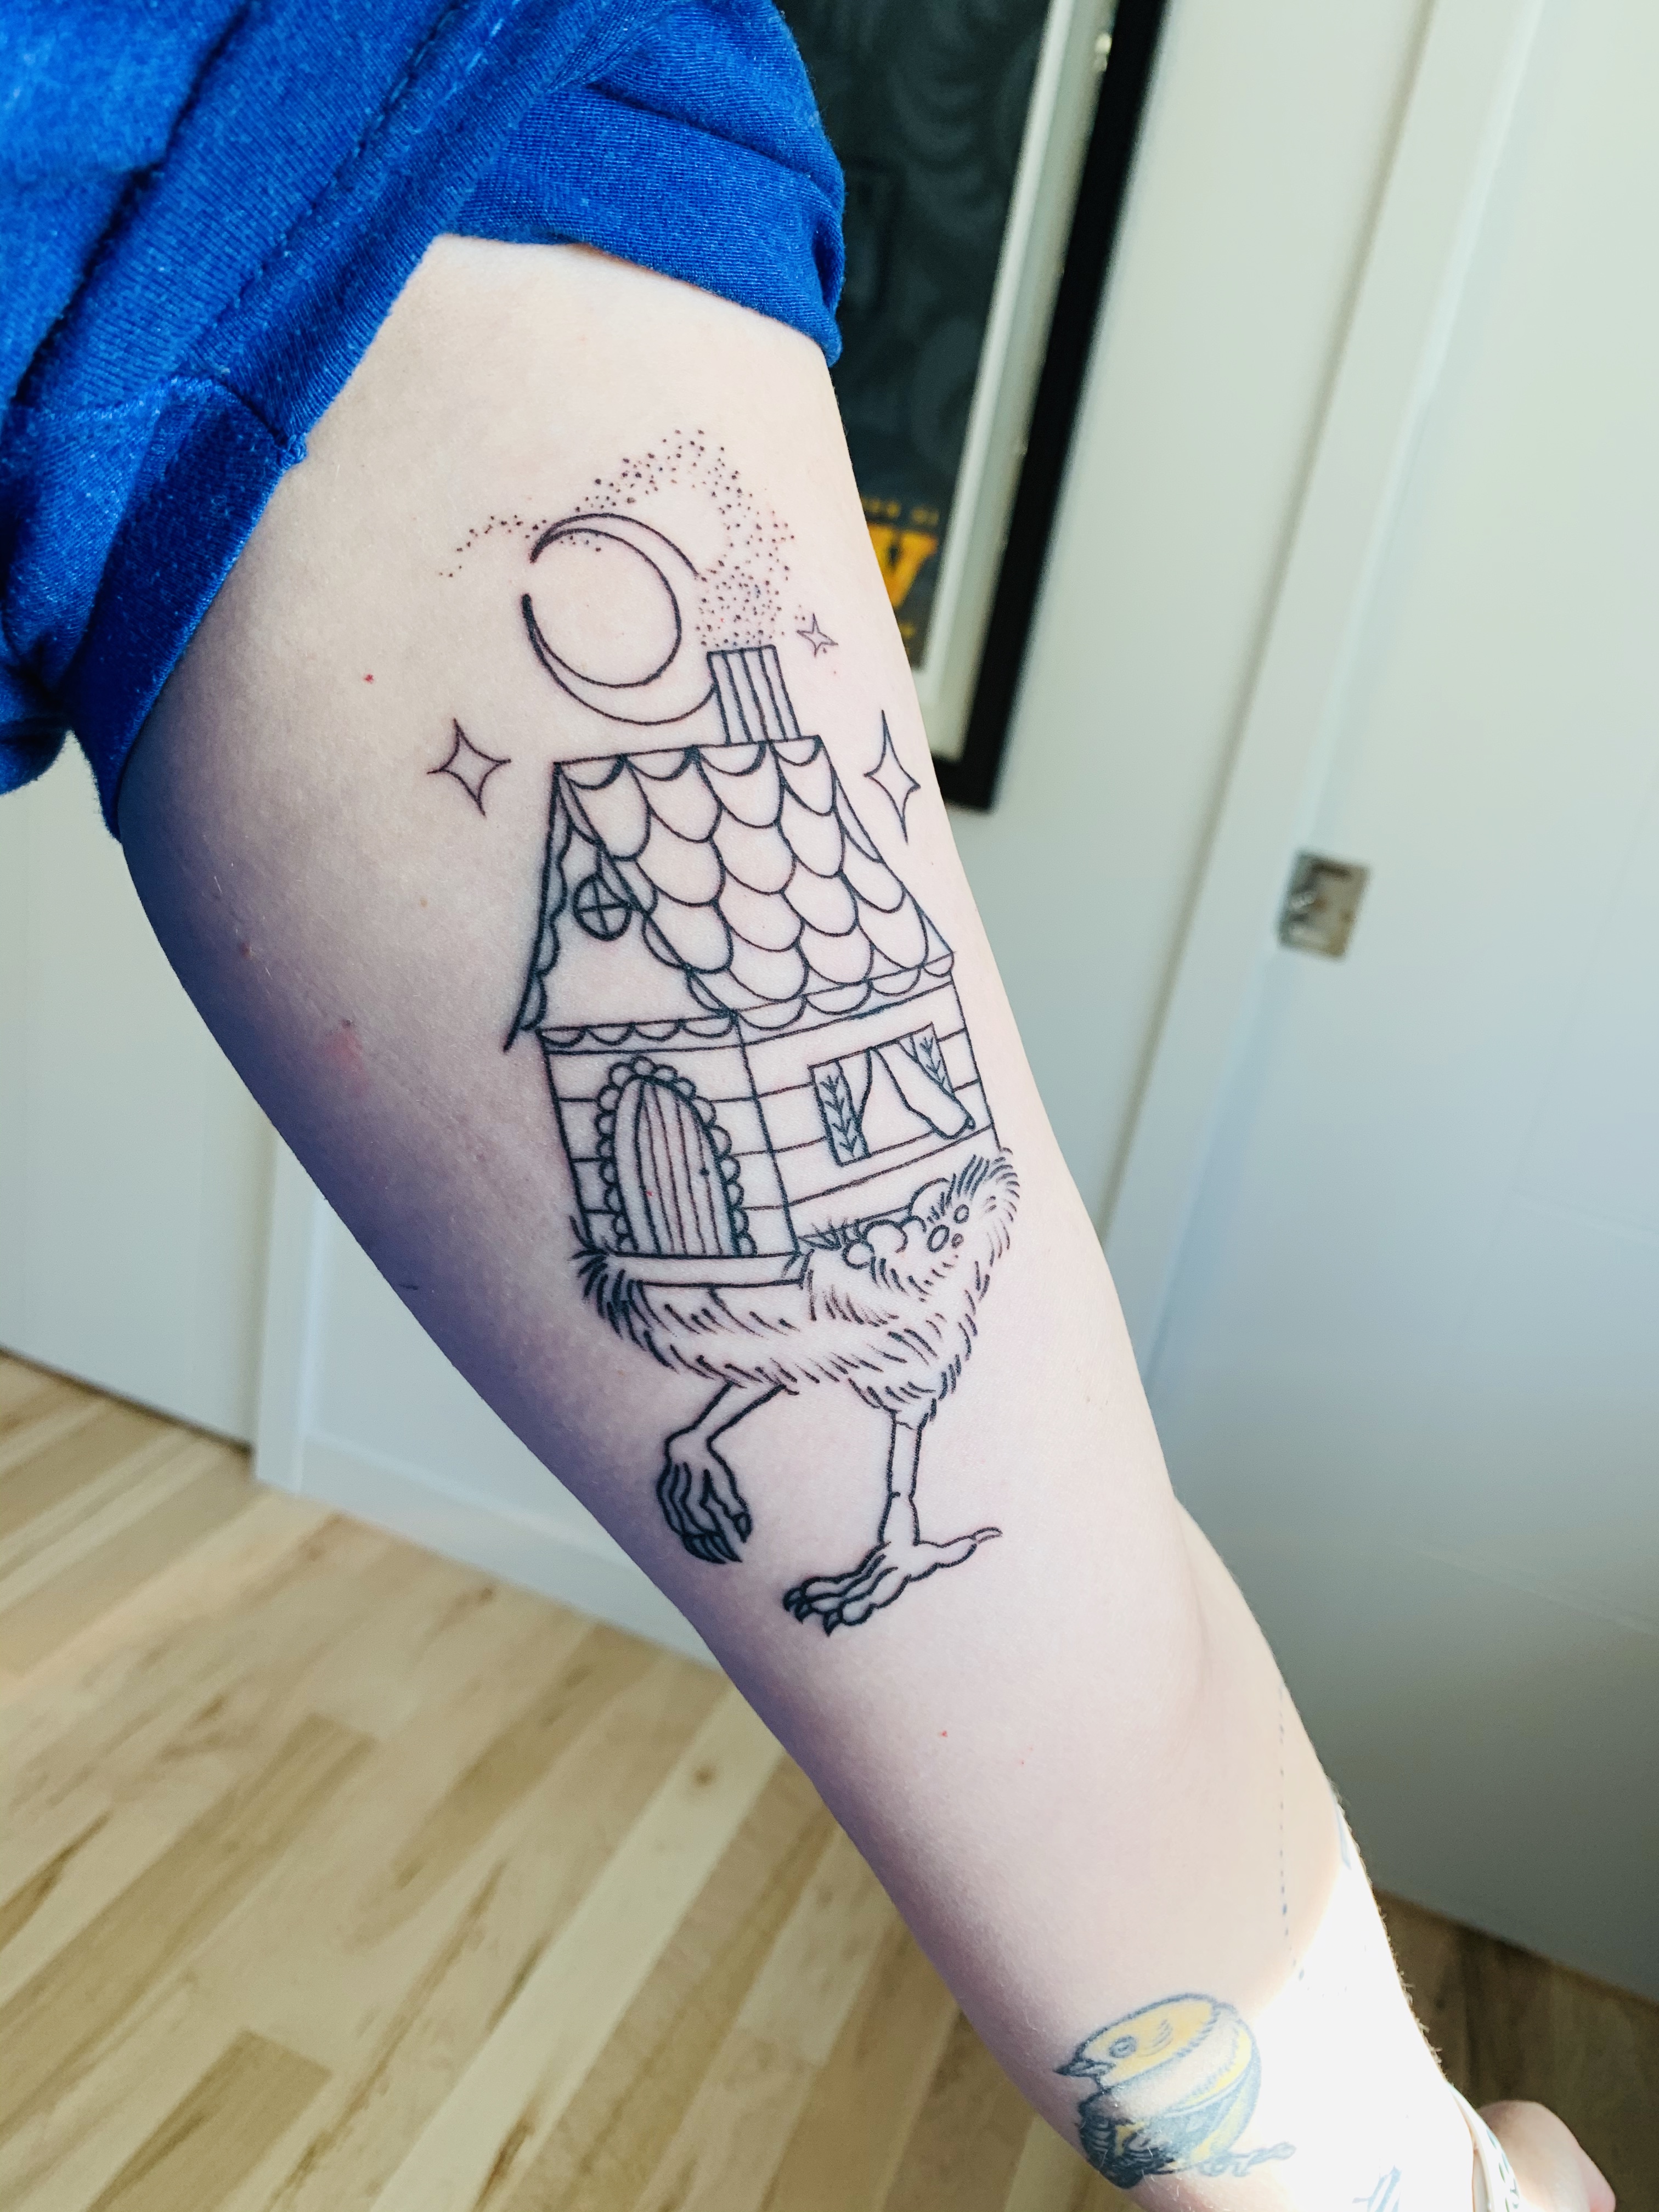 New tattoo: Baba Yaga's house – Word from the West